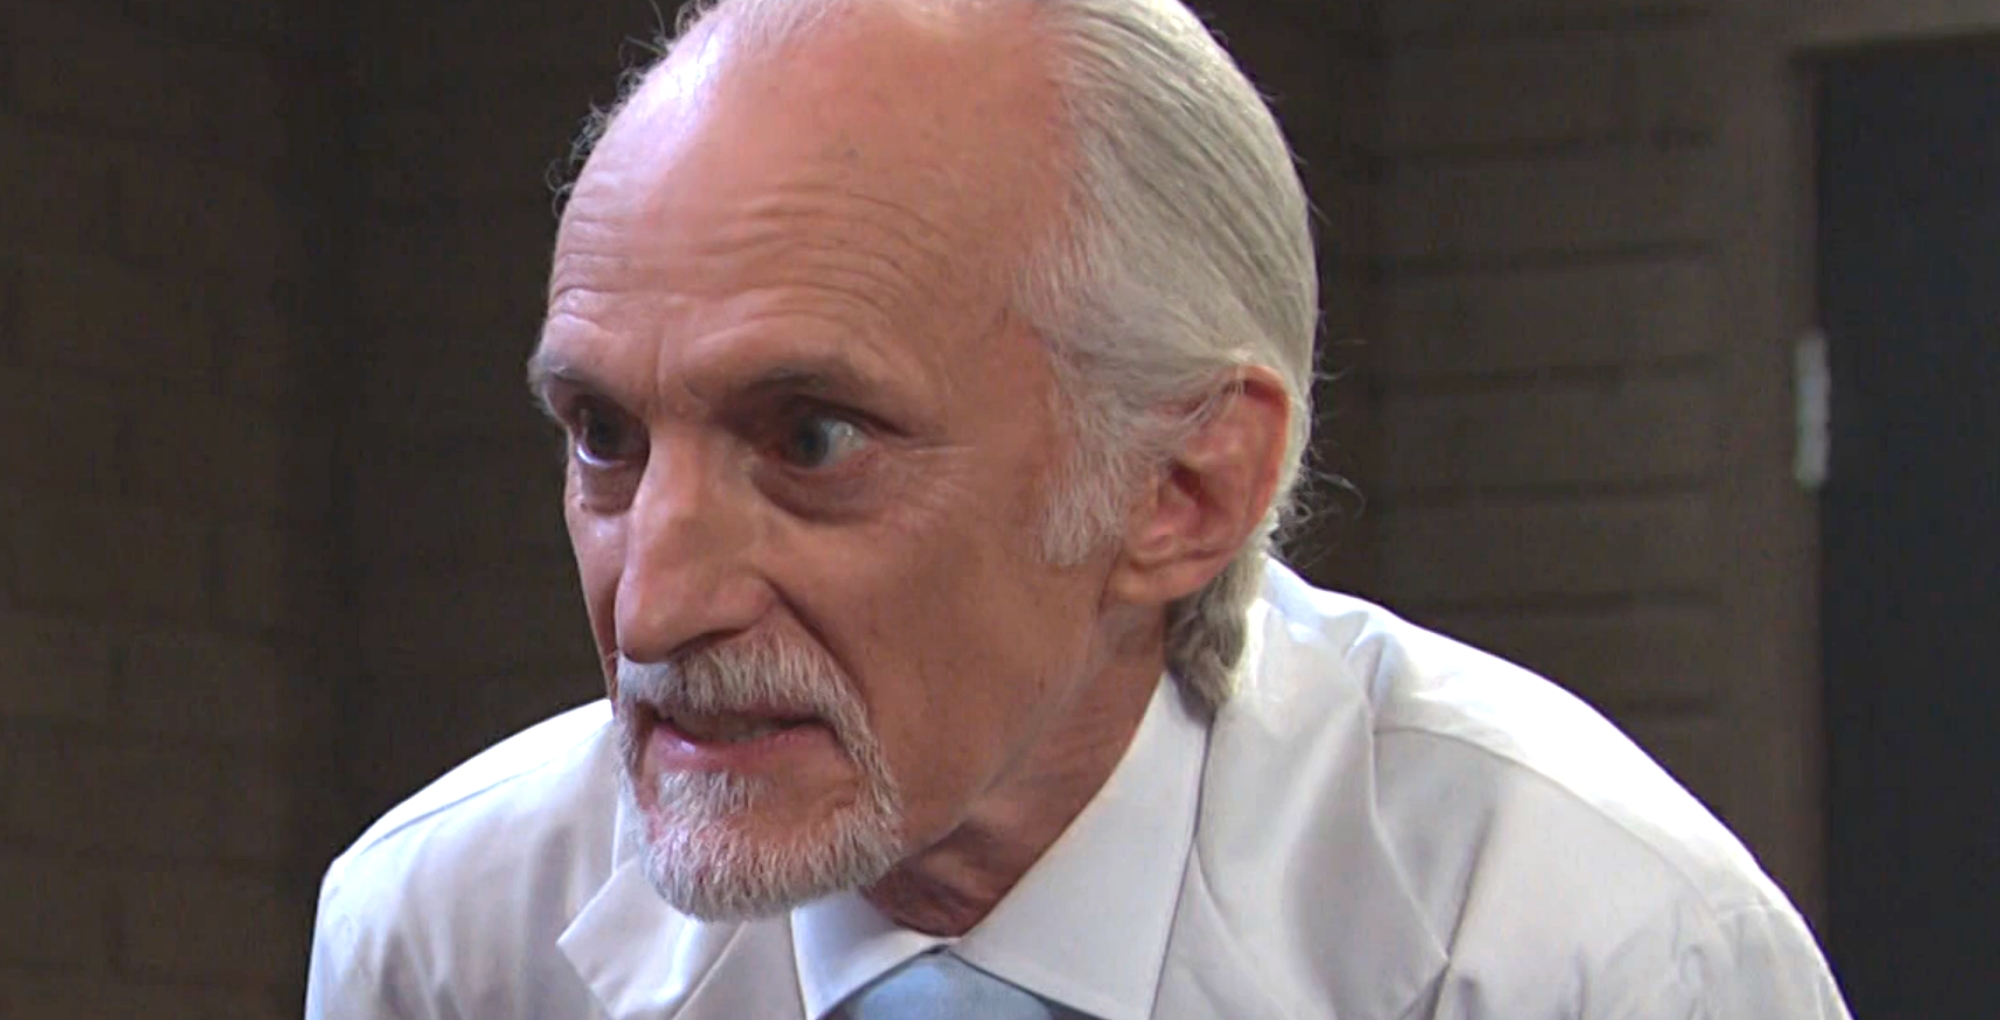 dr rolf is back on days of our lives. who should he bring back?